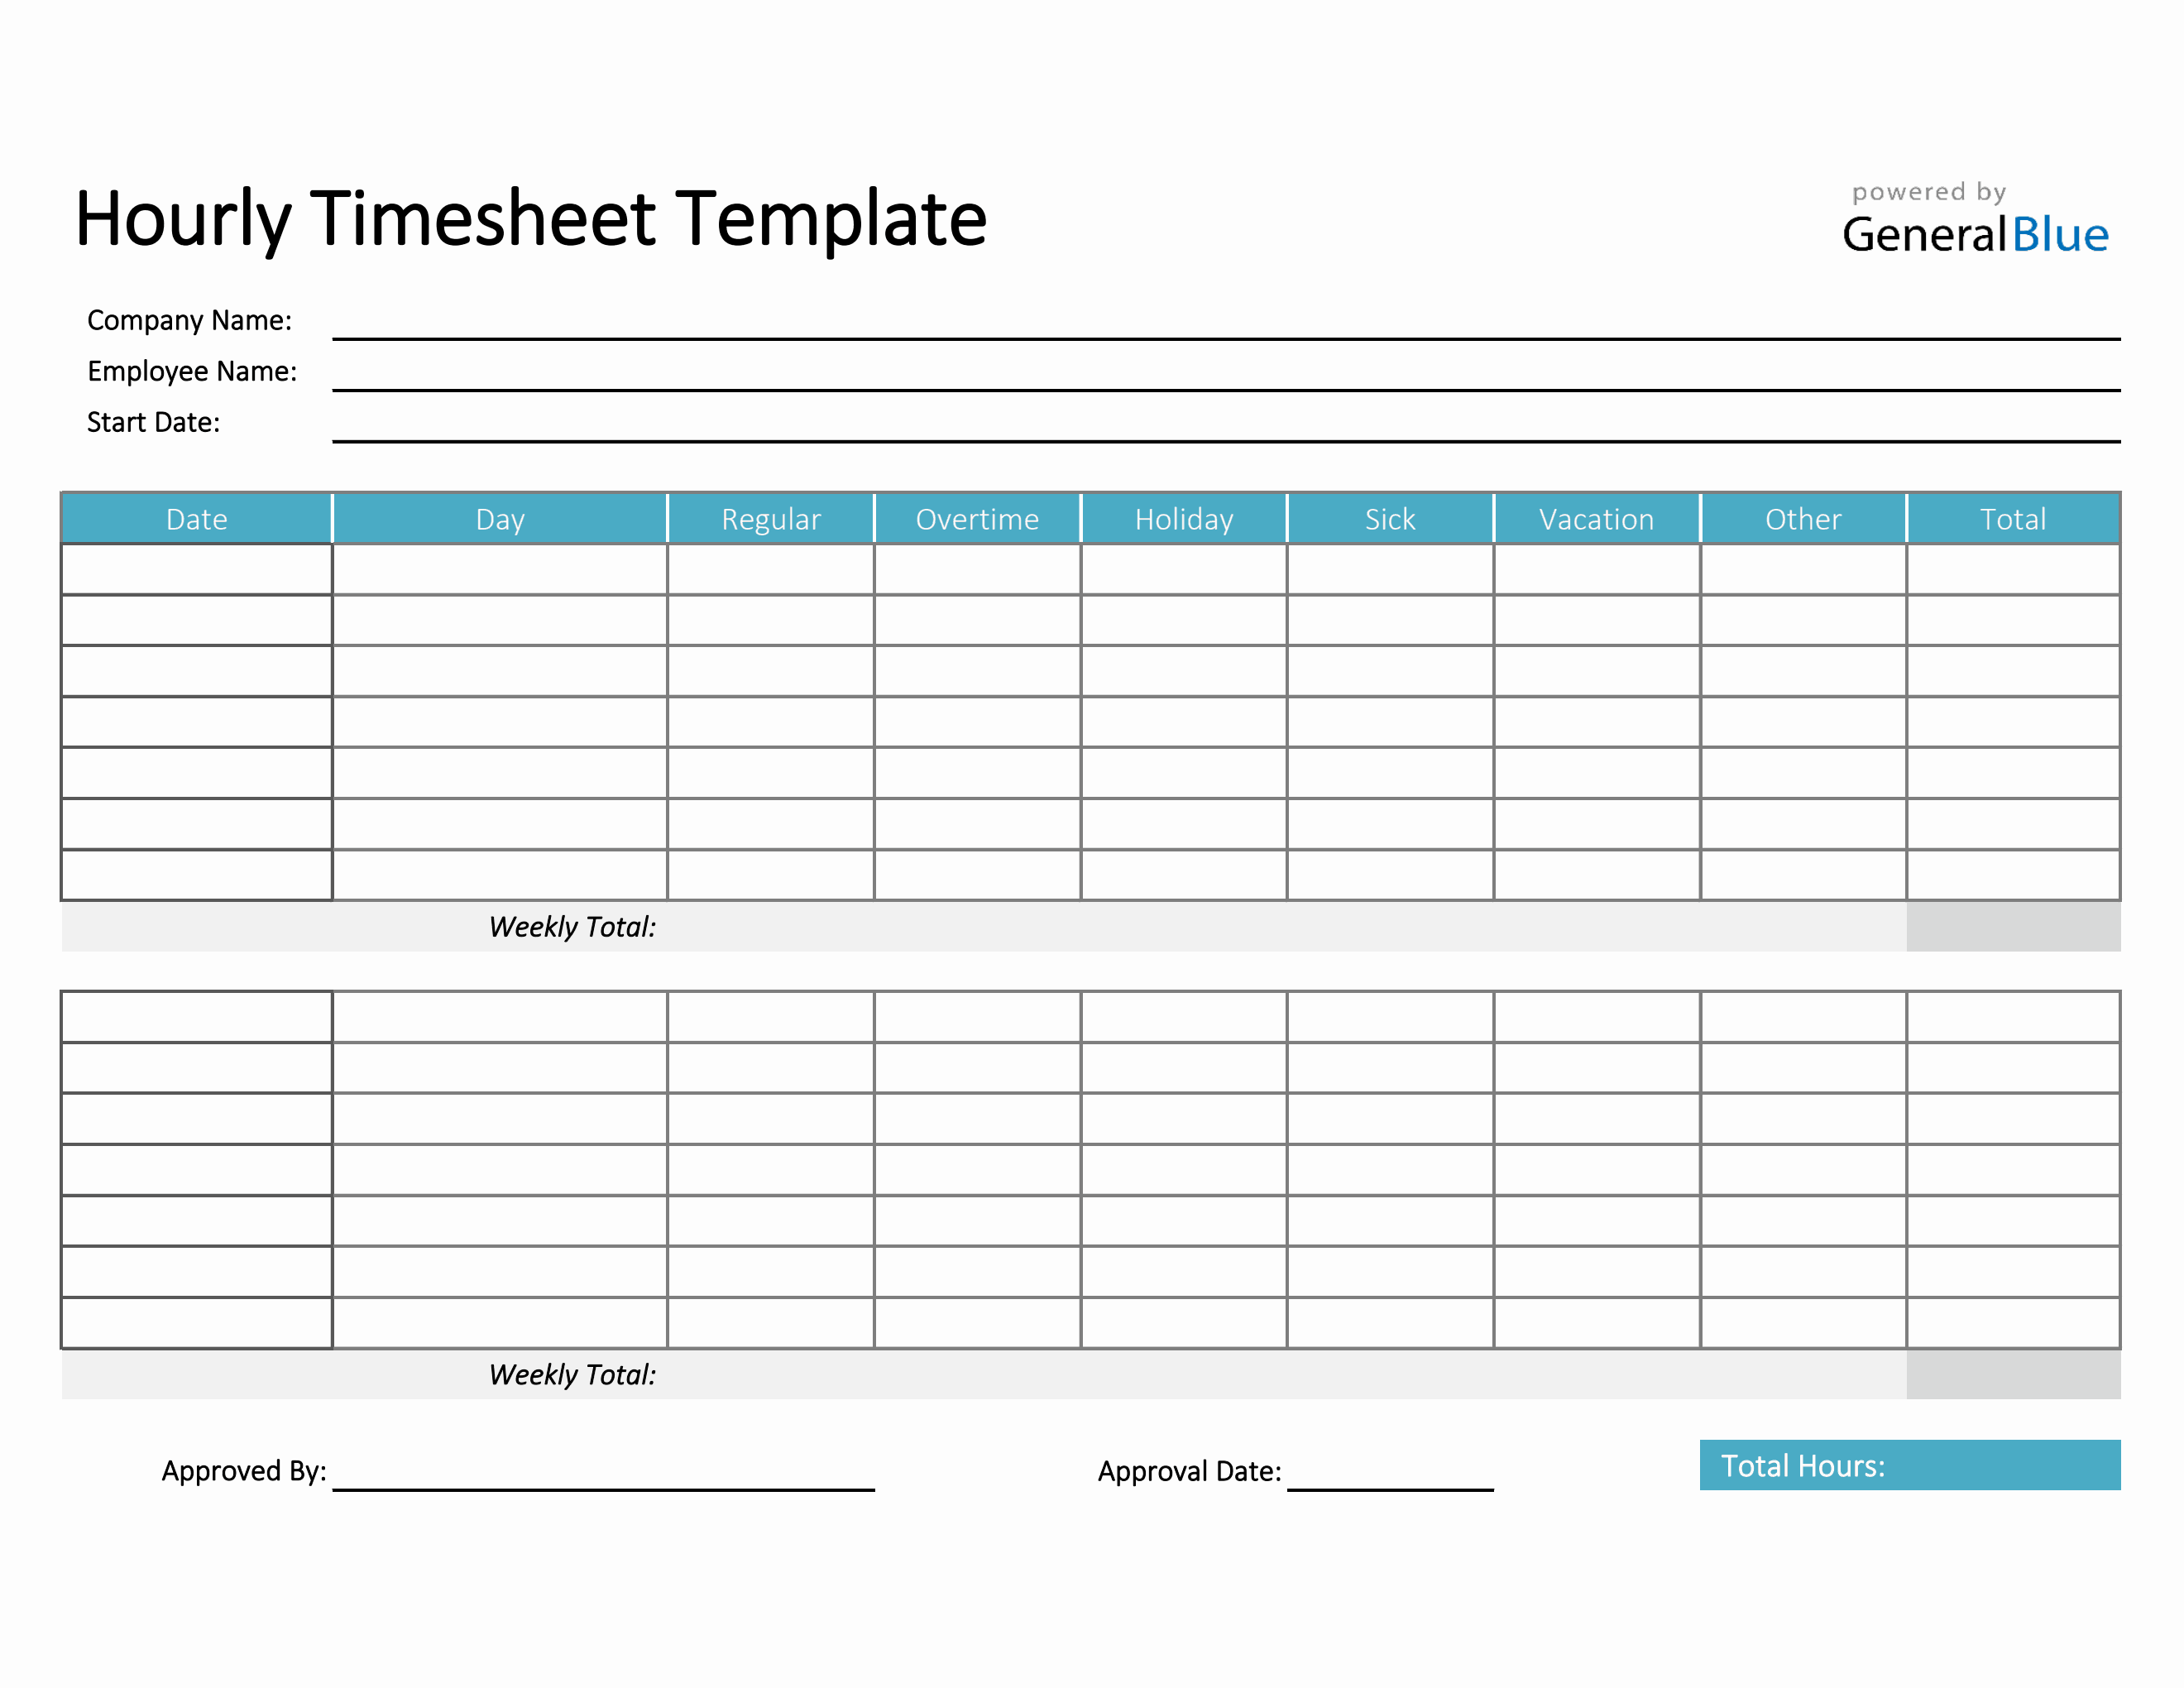 hourly-timesheet-template-in-excel-basic